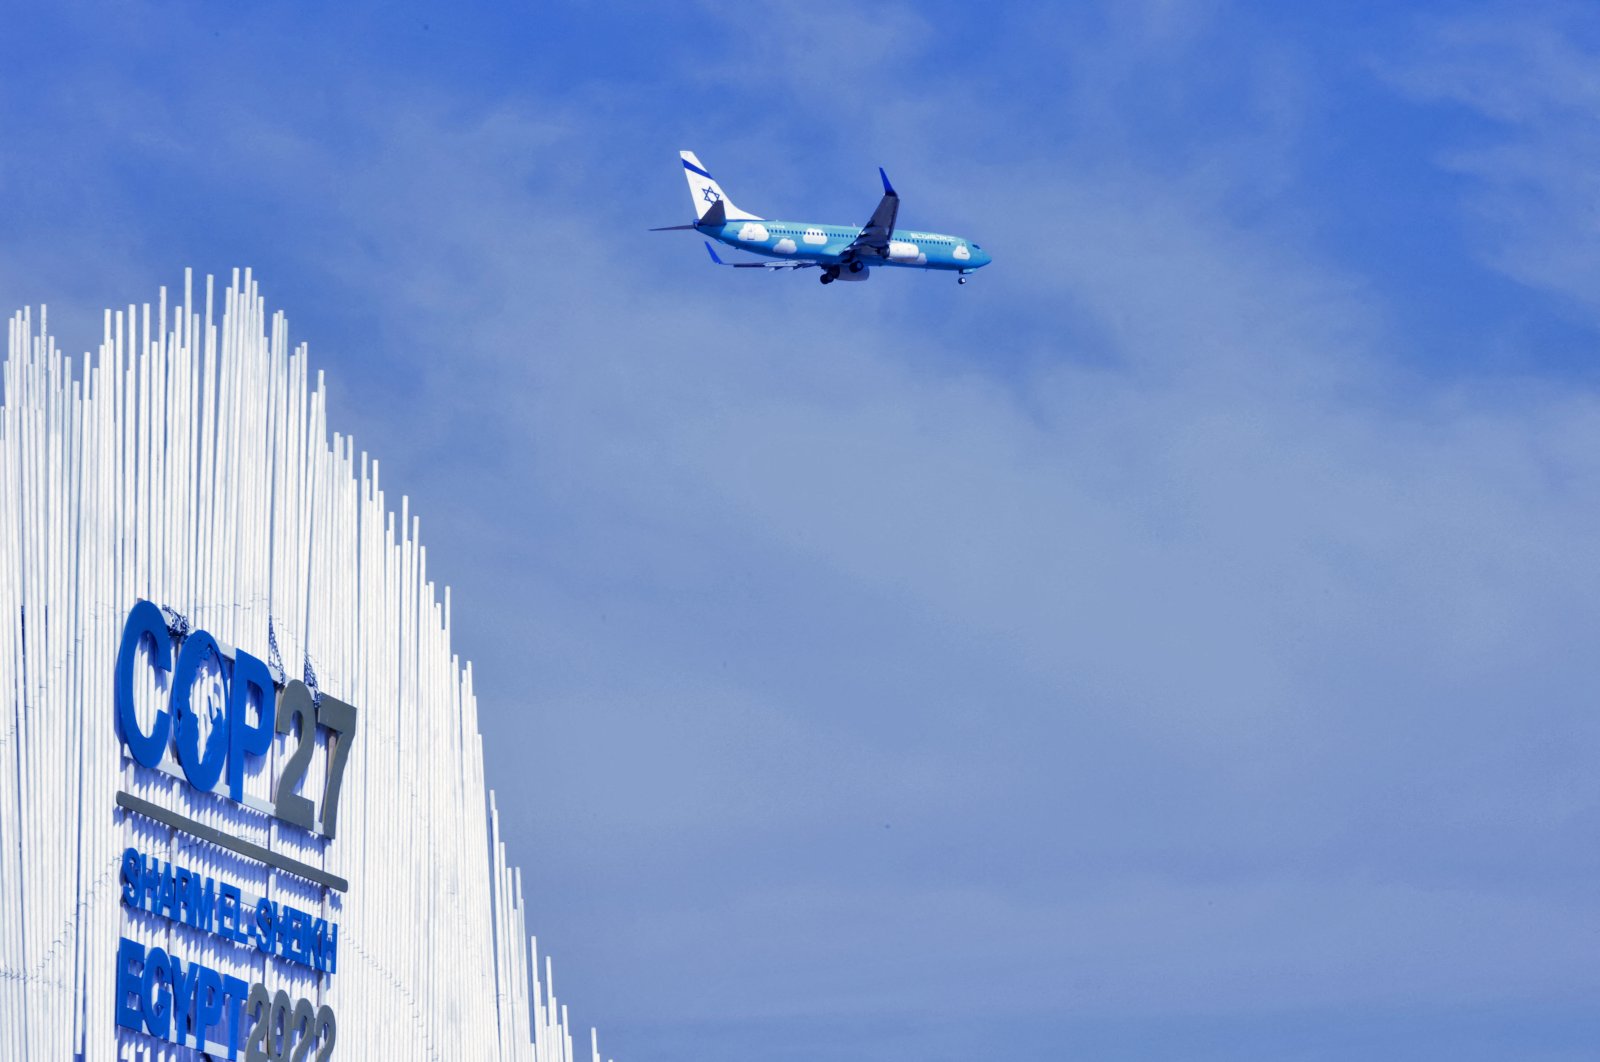 An Israeli El Al passenger plane flies over the Sharm el-Sheikh International Convention Centre, during the COP27 climate conference in Egypt's Red Sea resort city of the same name, on November 17, 2022. (Photo by AHMAD GHARABLI / AFP)